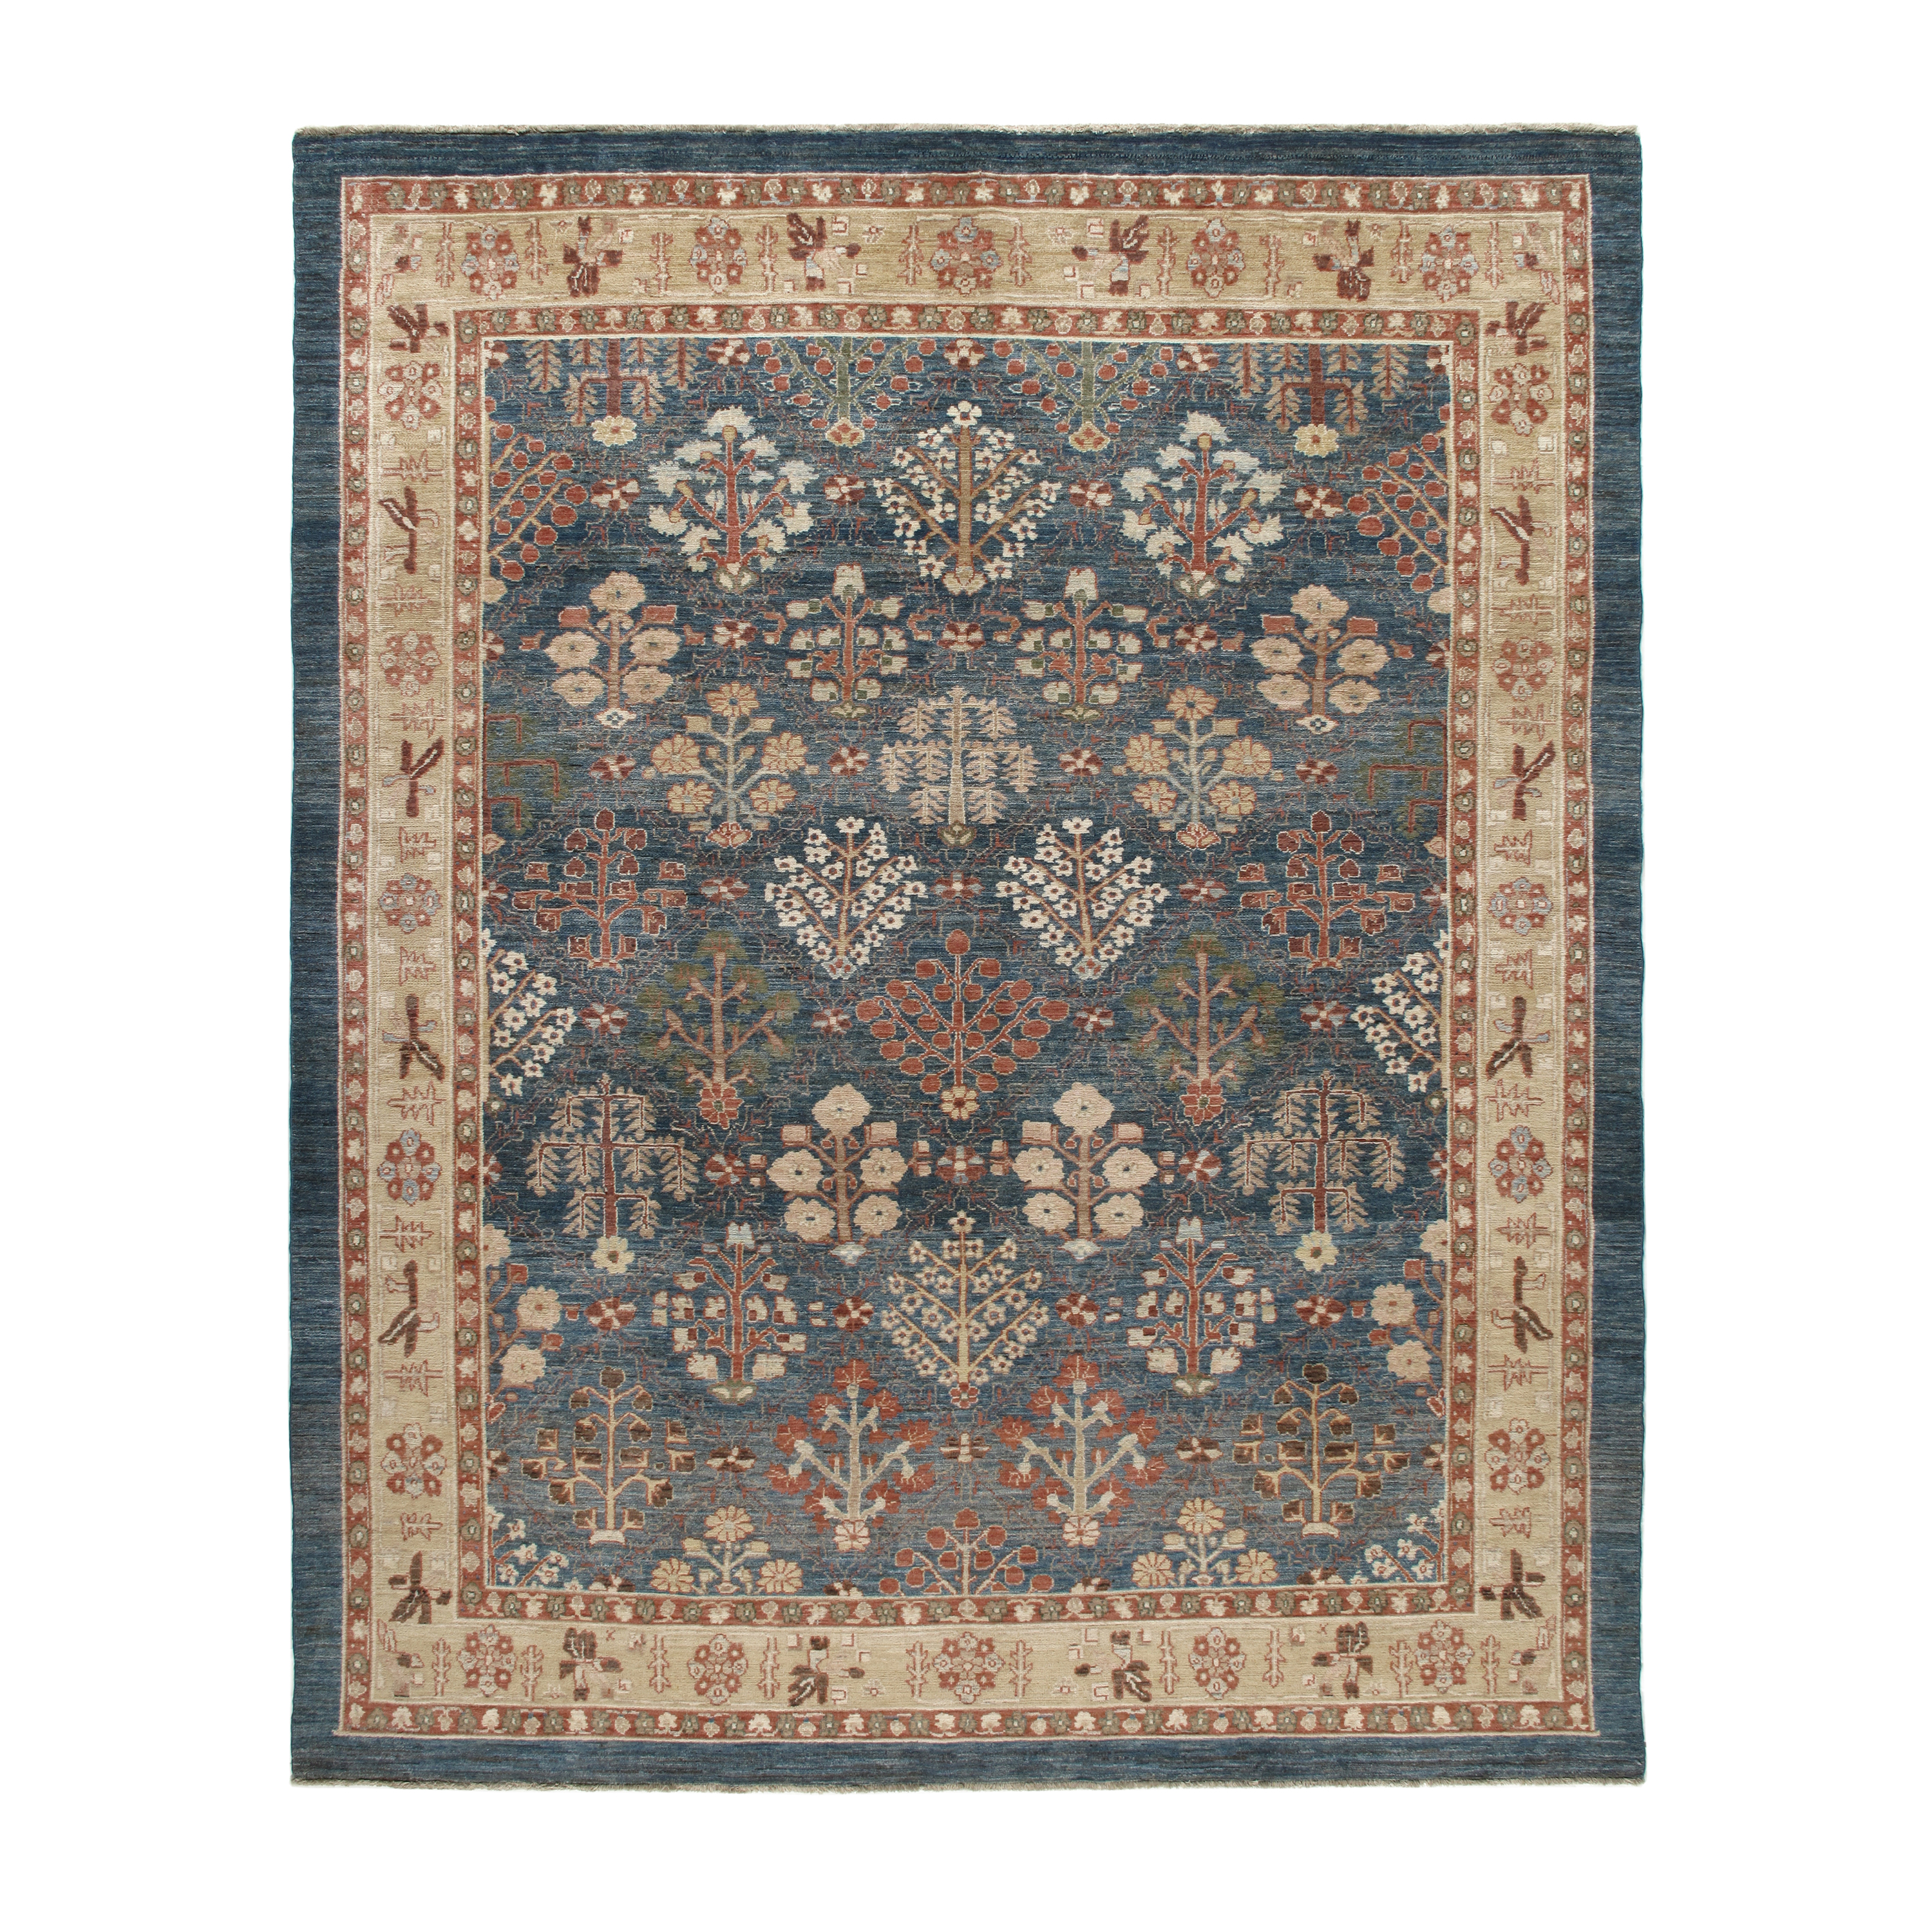 This Persian Kurdish rug is hand-knotted.